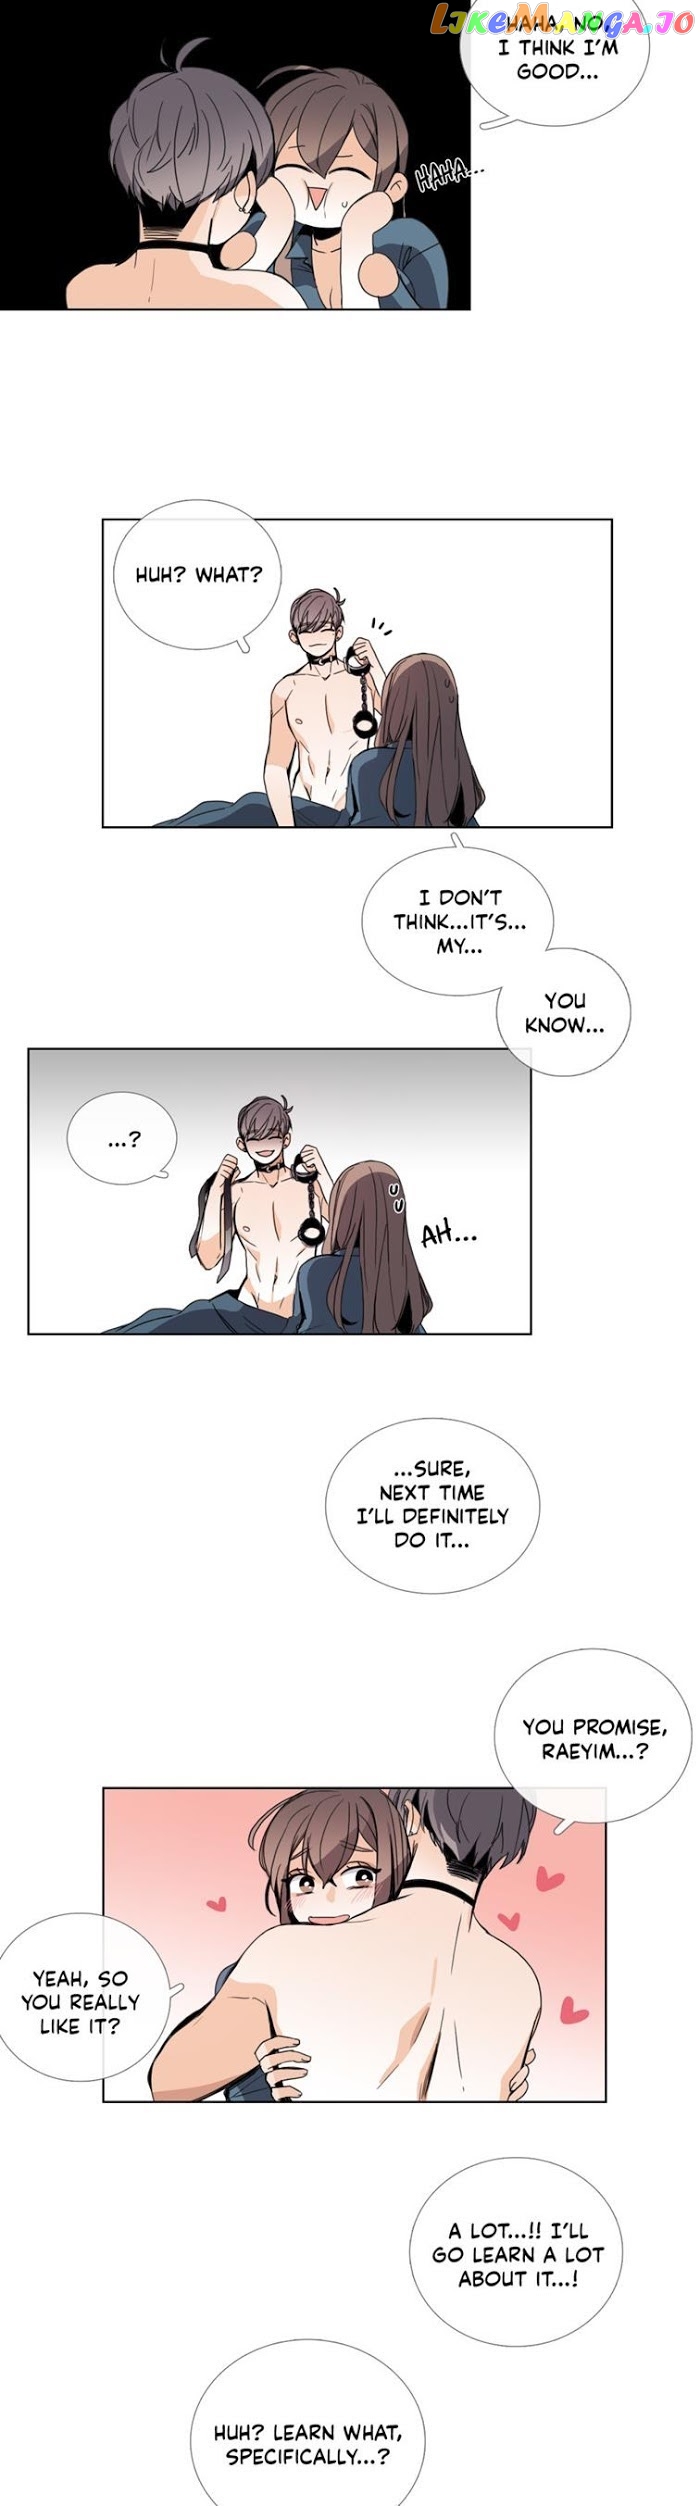 Talk to Me chapter 47-48 - page 29